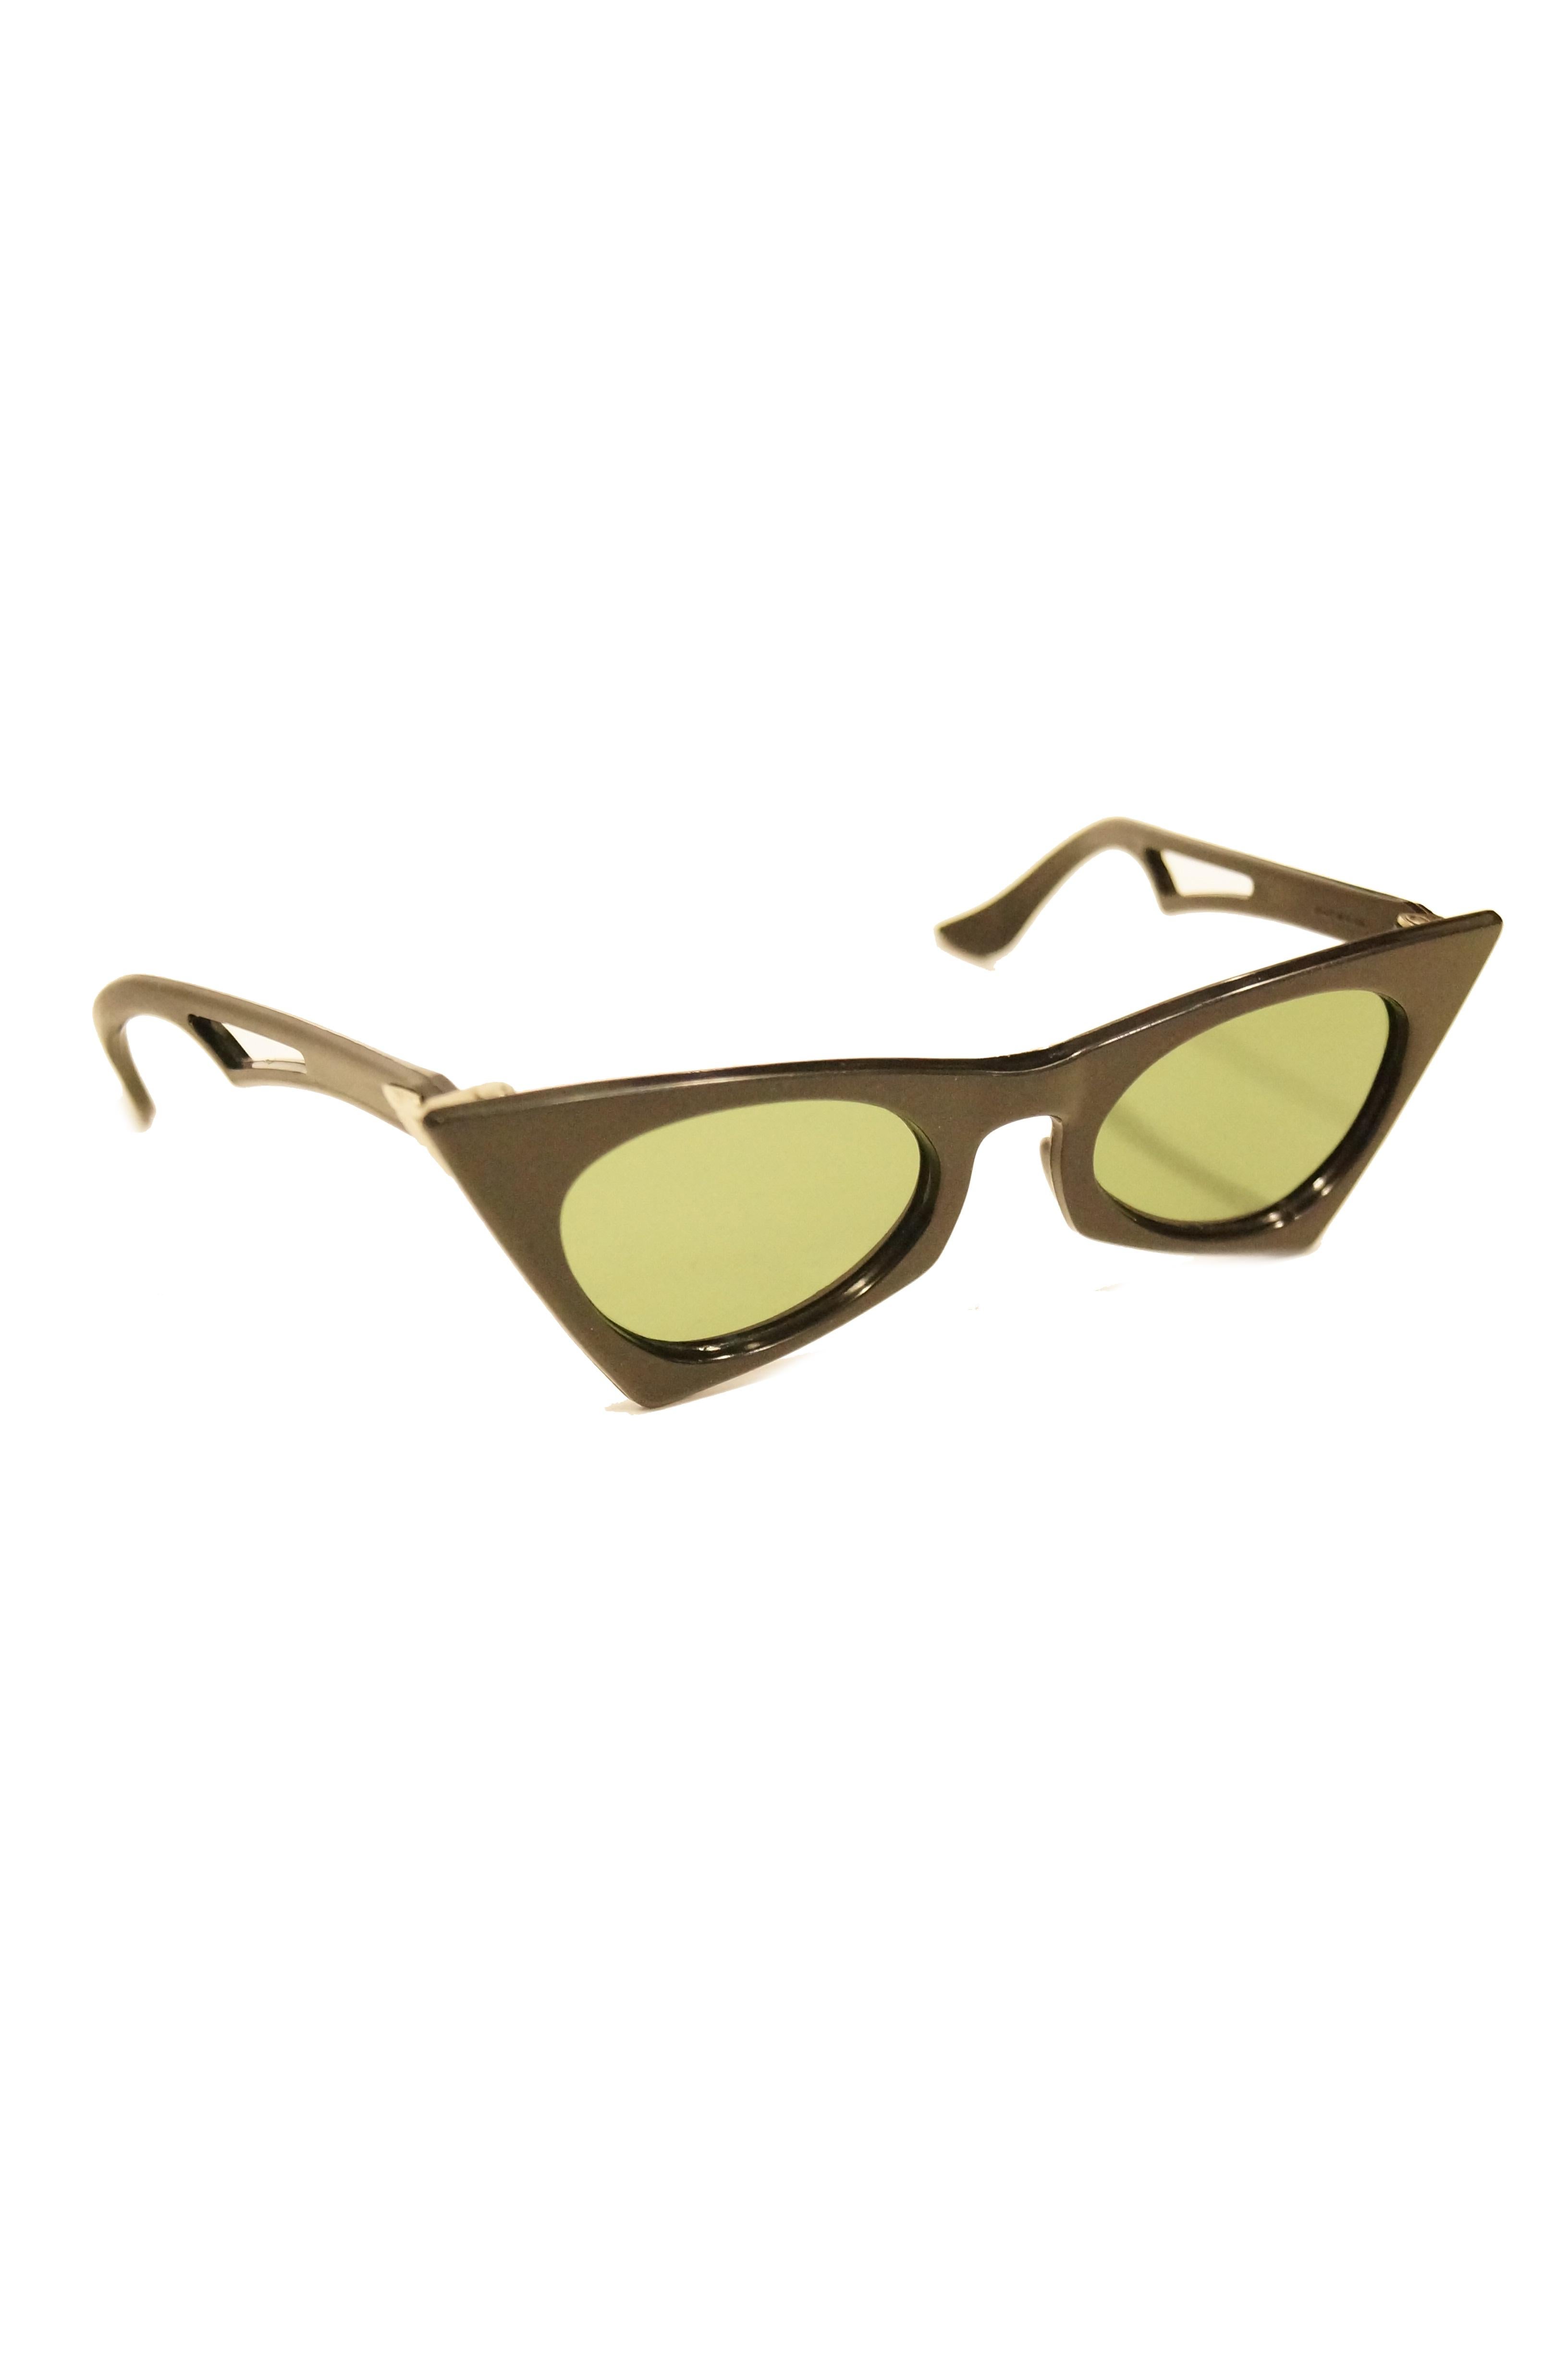 Iconic edgy sunglasses straight from the 50s! These striking frames have a bold green lens thats contrasted by glossy black frames. The frames are amazing, with a sharp, trapezoidal, butterfly - like shape on the sides, and with a straight top that